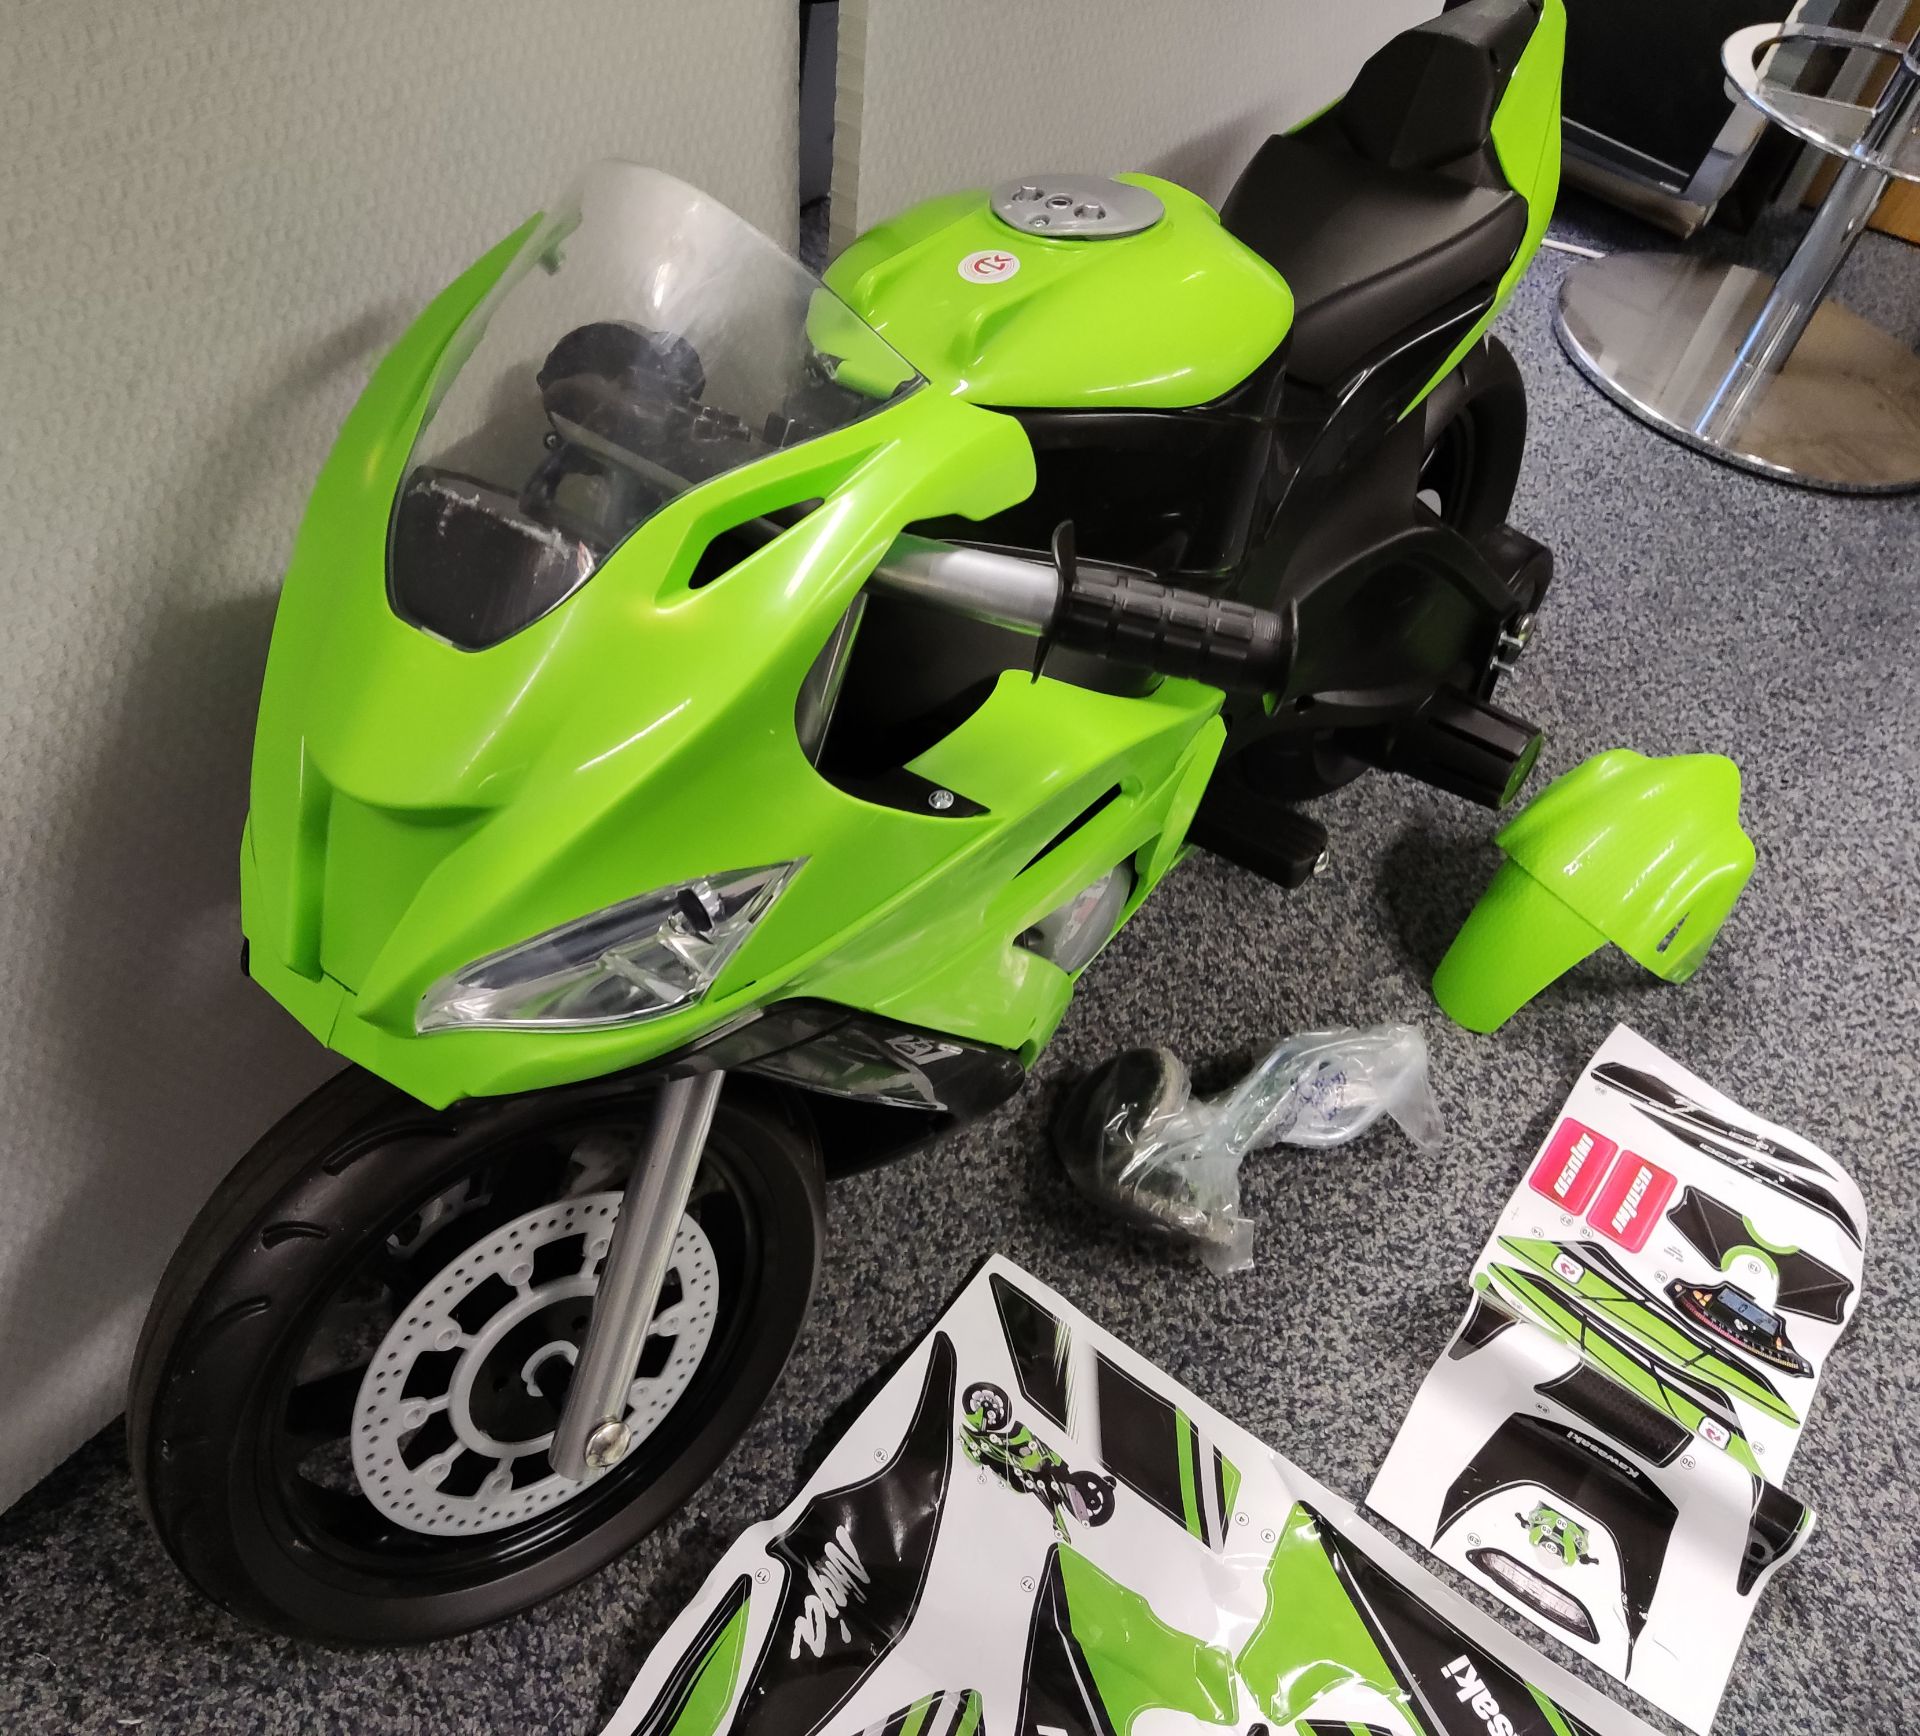 1 x Injusa Kids Electric Ride On Kawasaki ZX10 12V Motorcycle - 6495 - HTYS174 - CL987 - Location: - Image 10 of 24